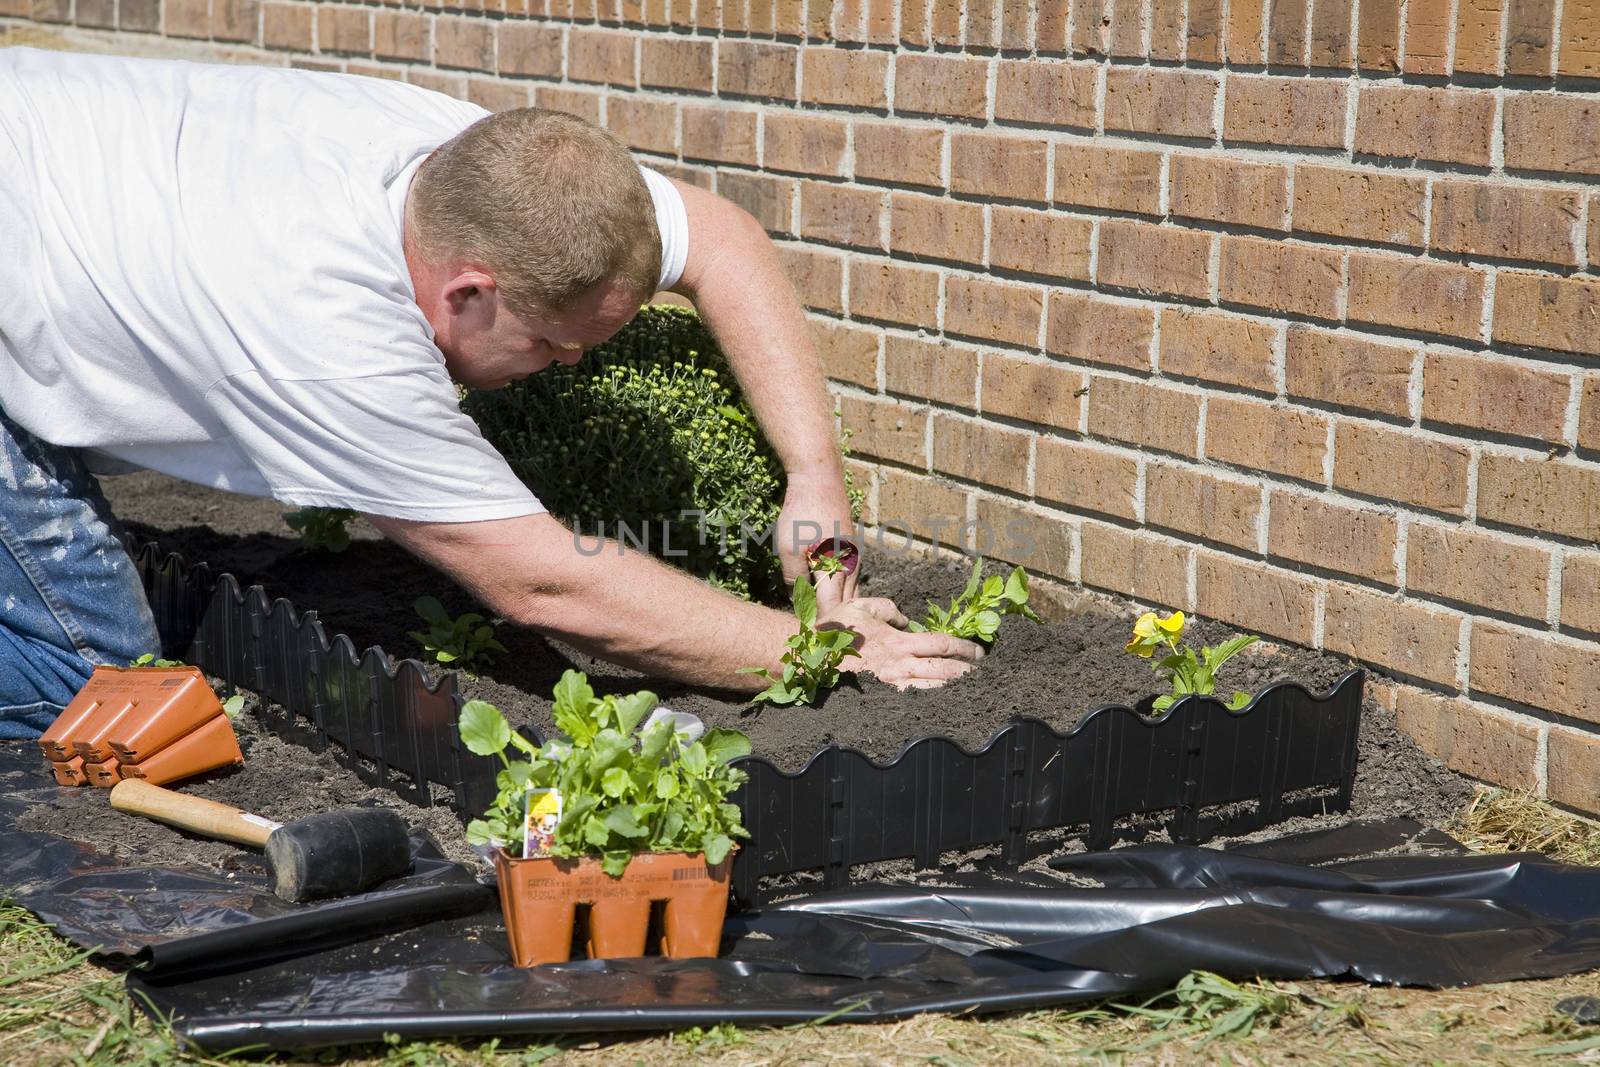 Man planting flowers in garden, dressing up landscape to help sell home